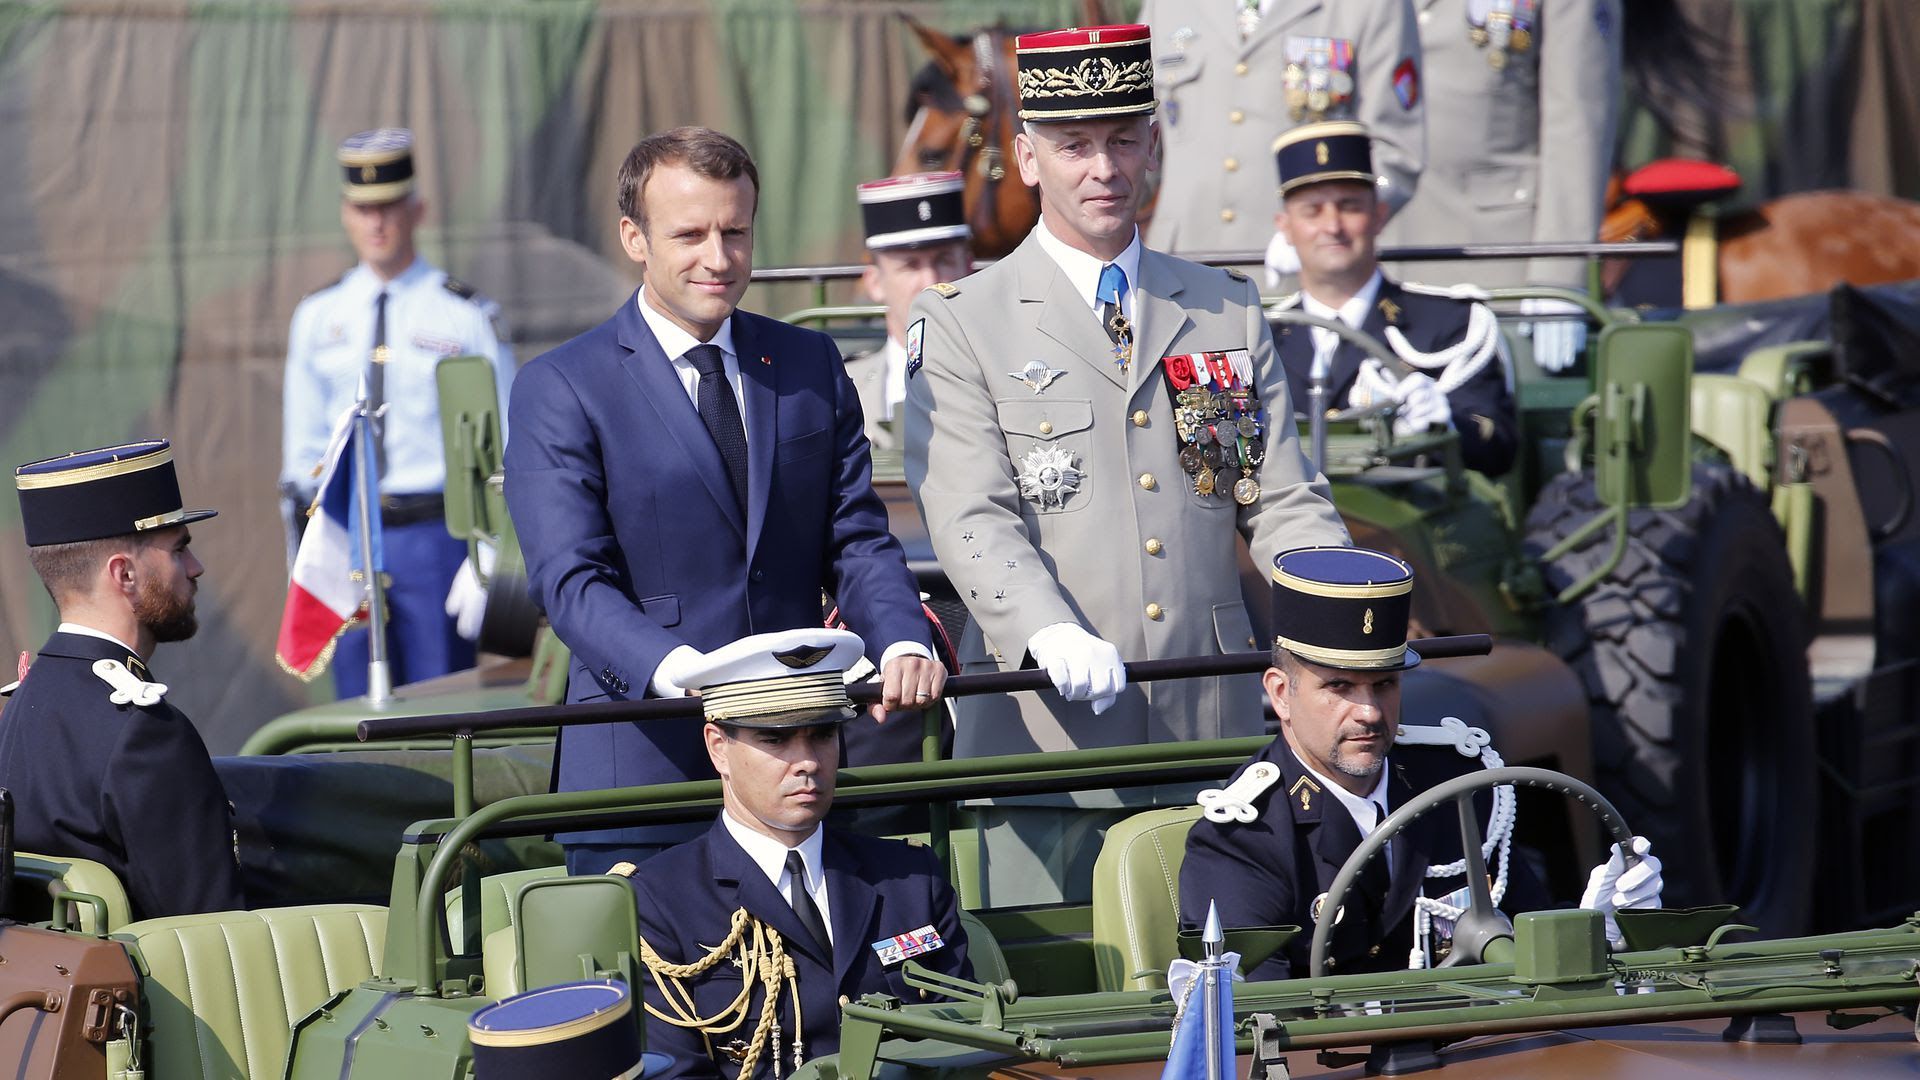 Macron parades down the Champs-Elysees on Bastille Day